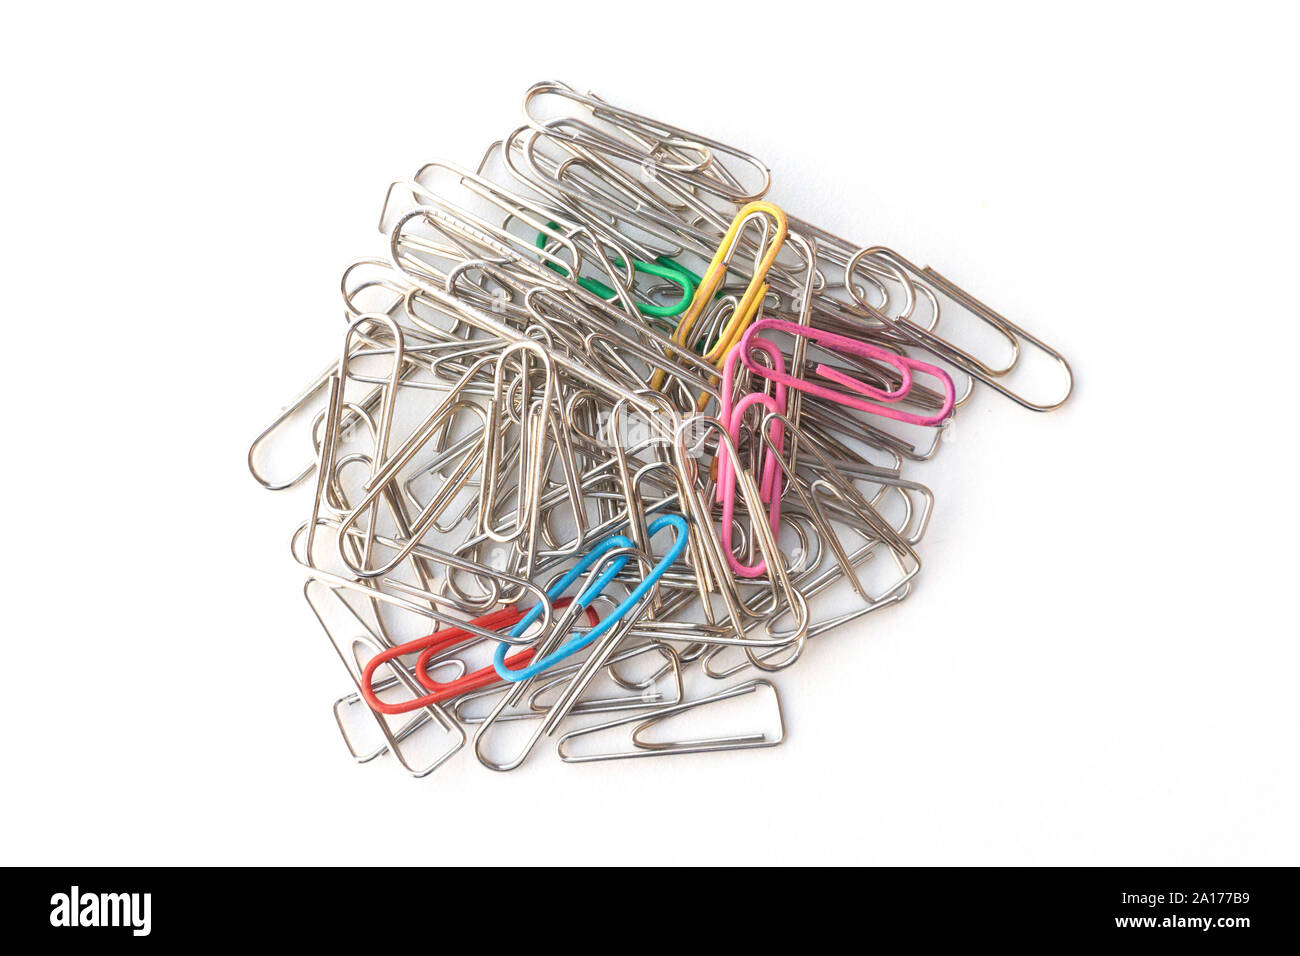 Multi Colored Paperclips on white background Stock Photo